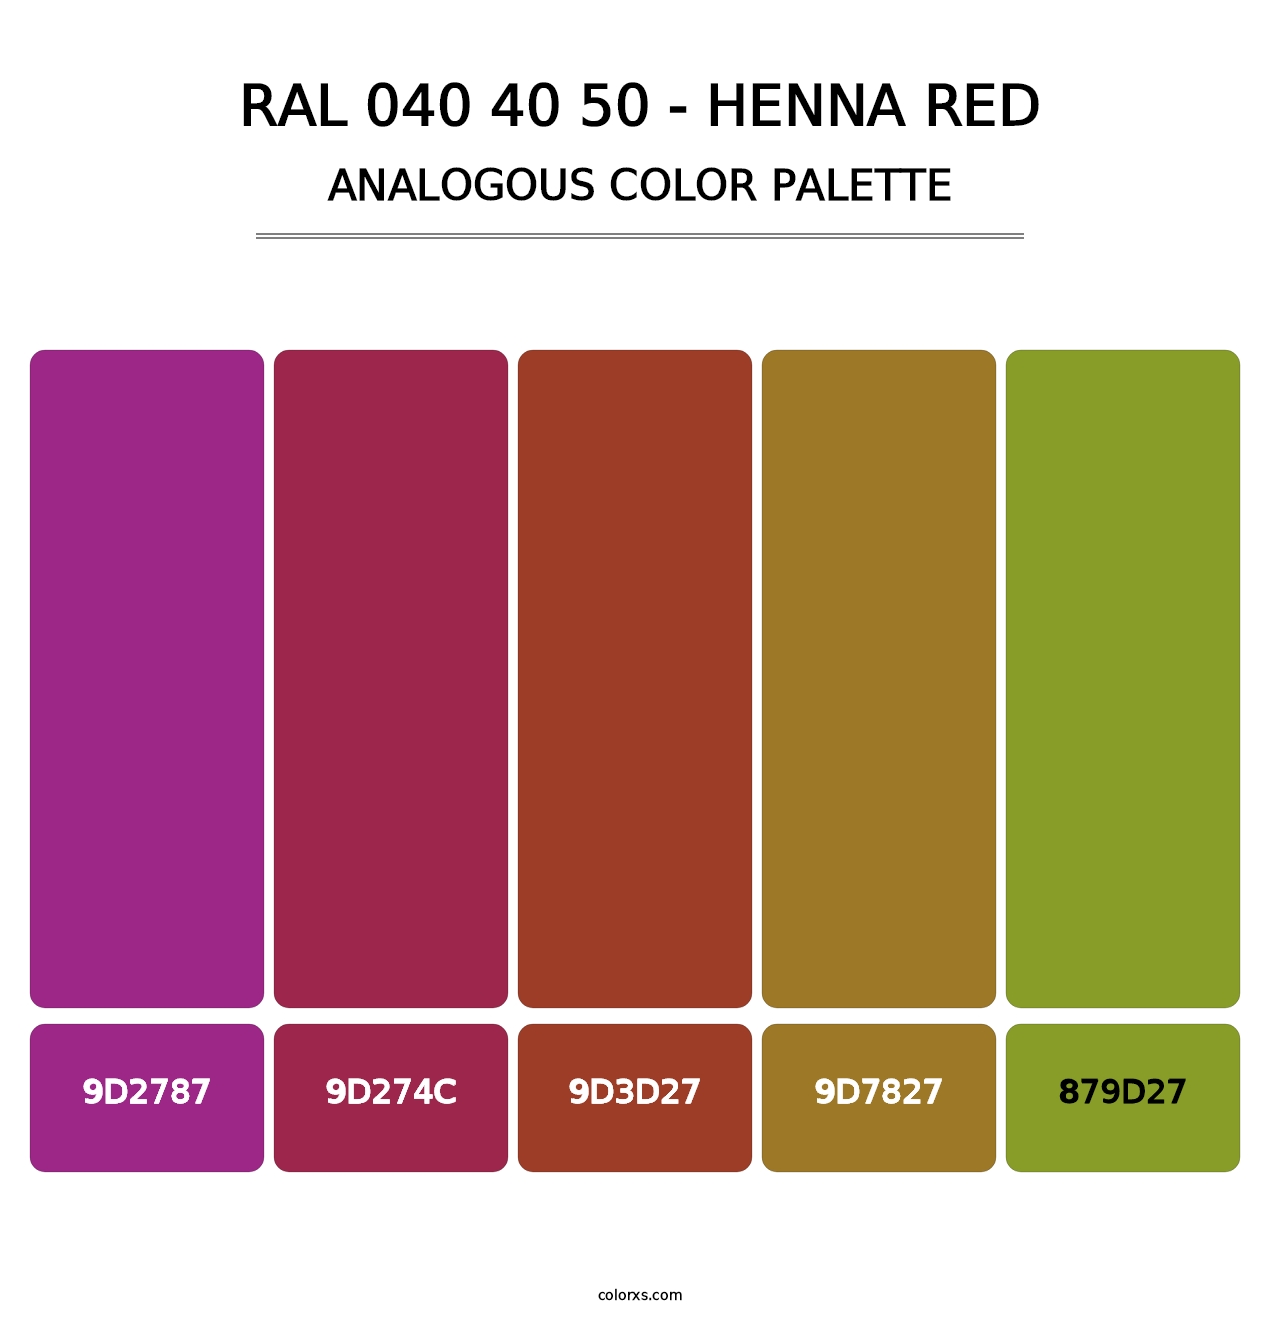 RAL 040 40 50 - Henna Red - Analogous Color Palette